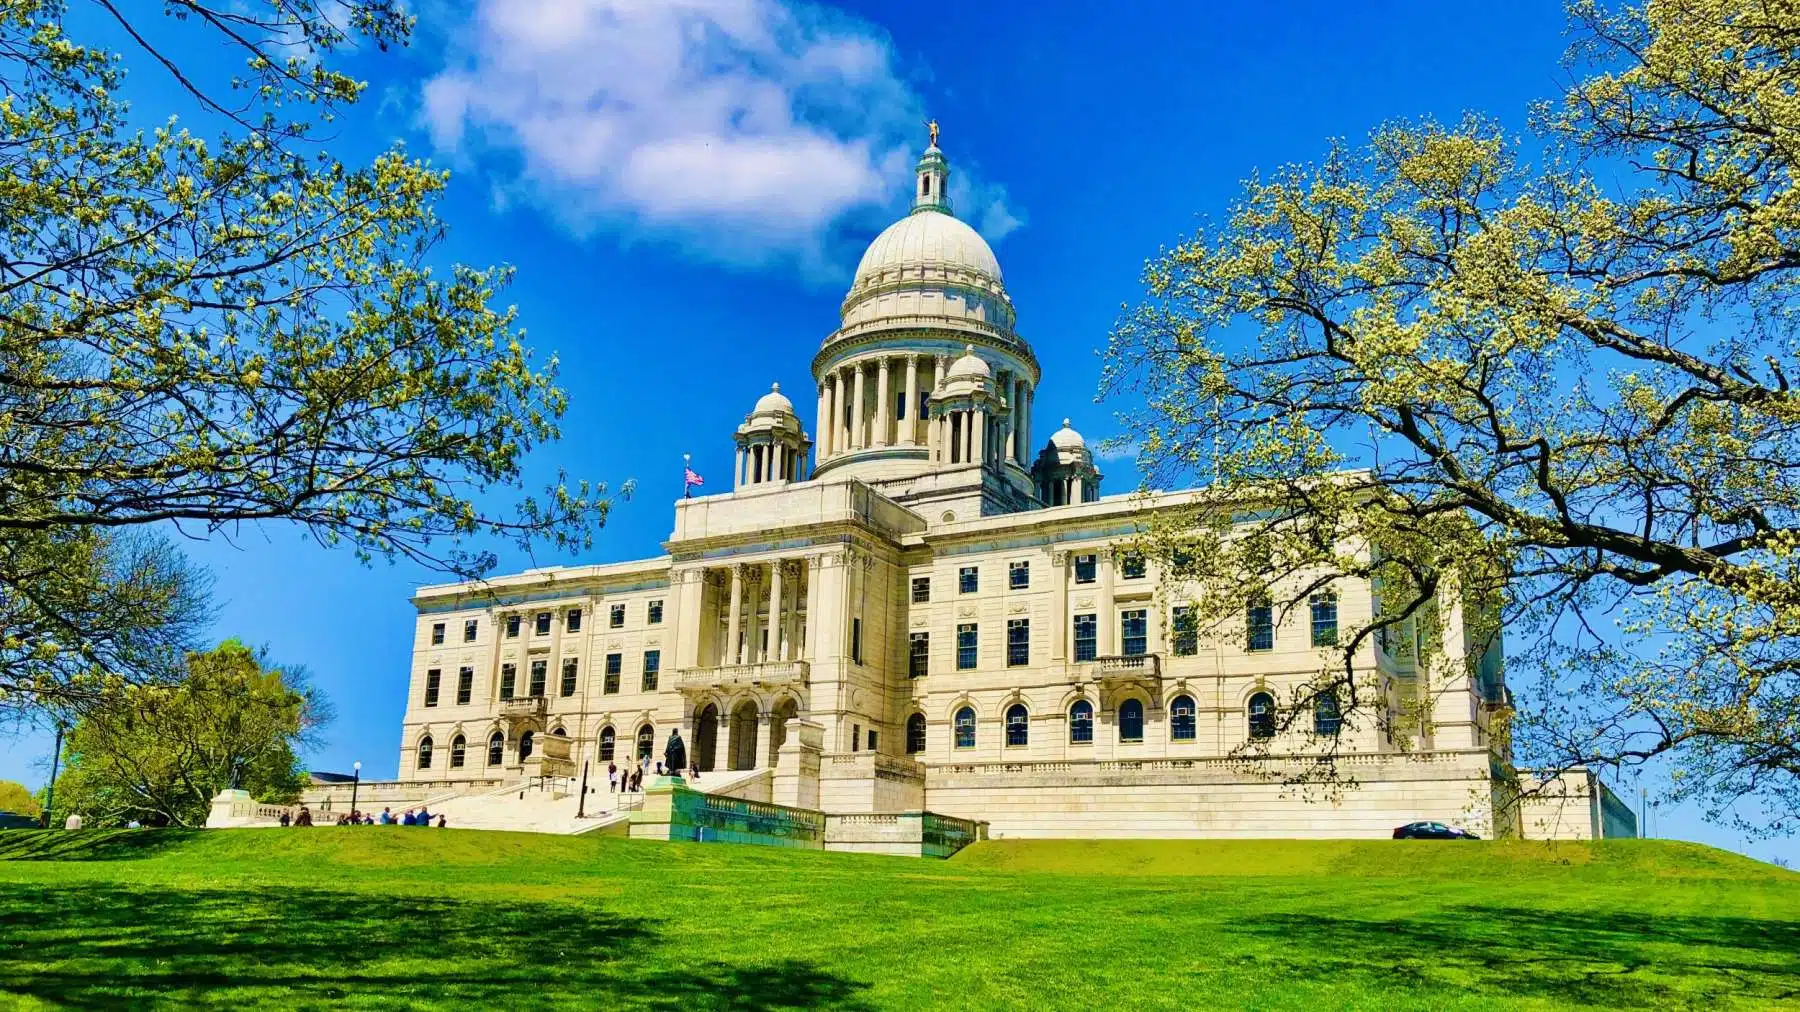 Rhode Island State House Tuesday, May 11, 2021